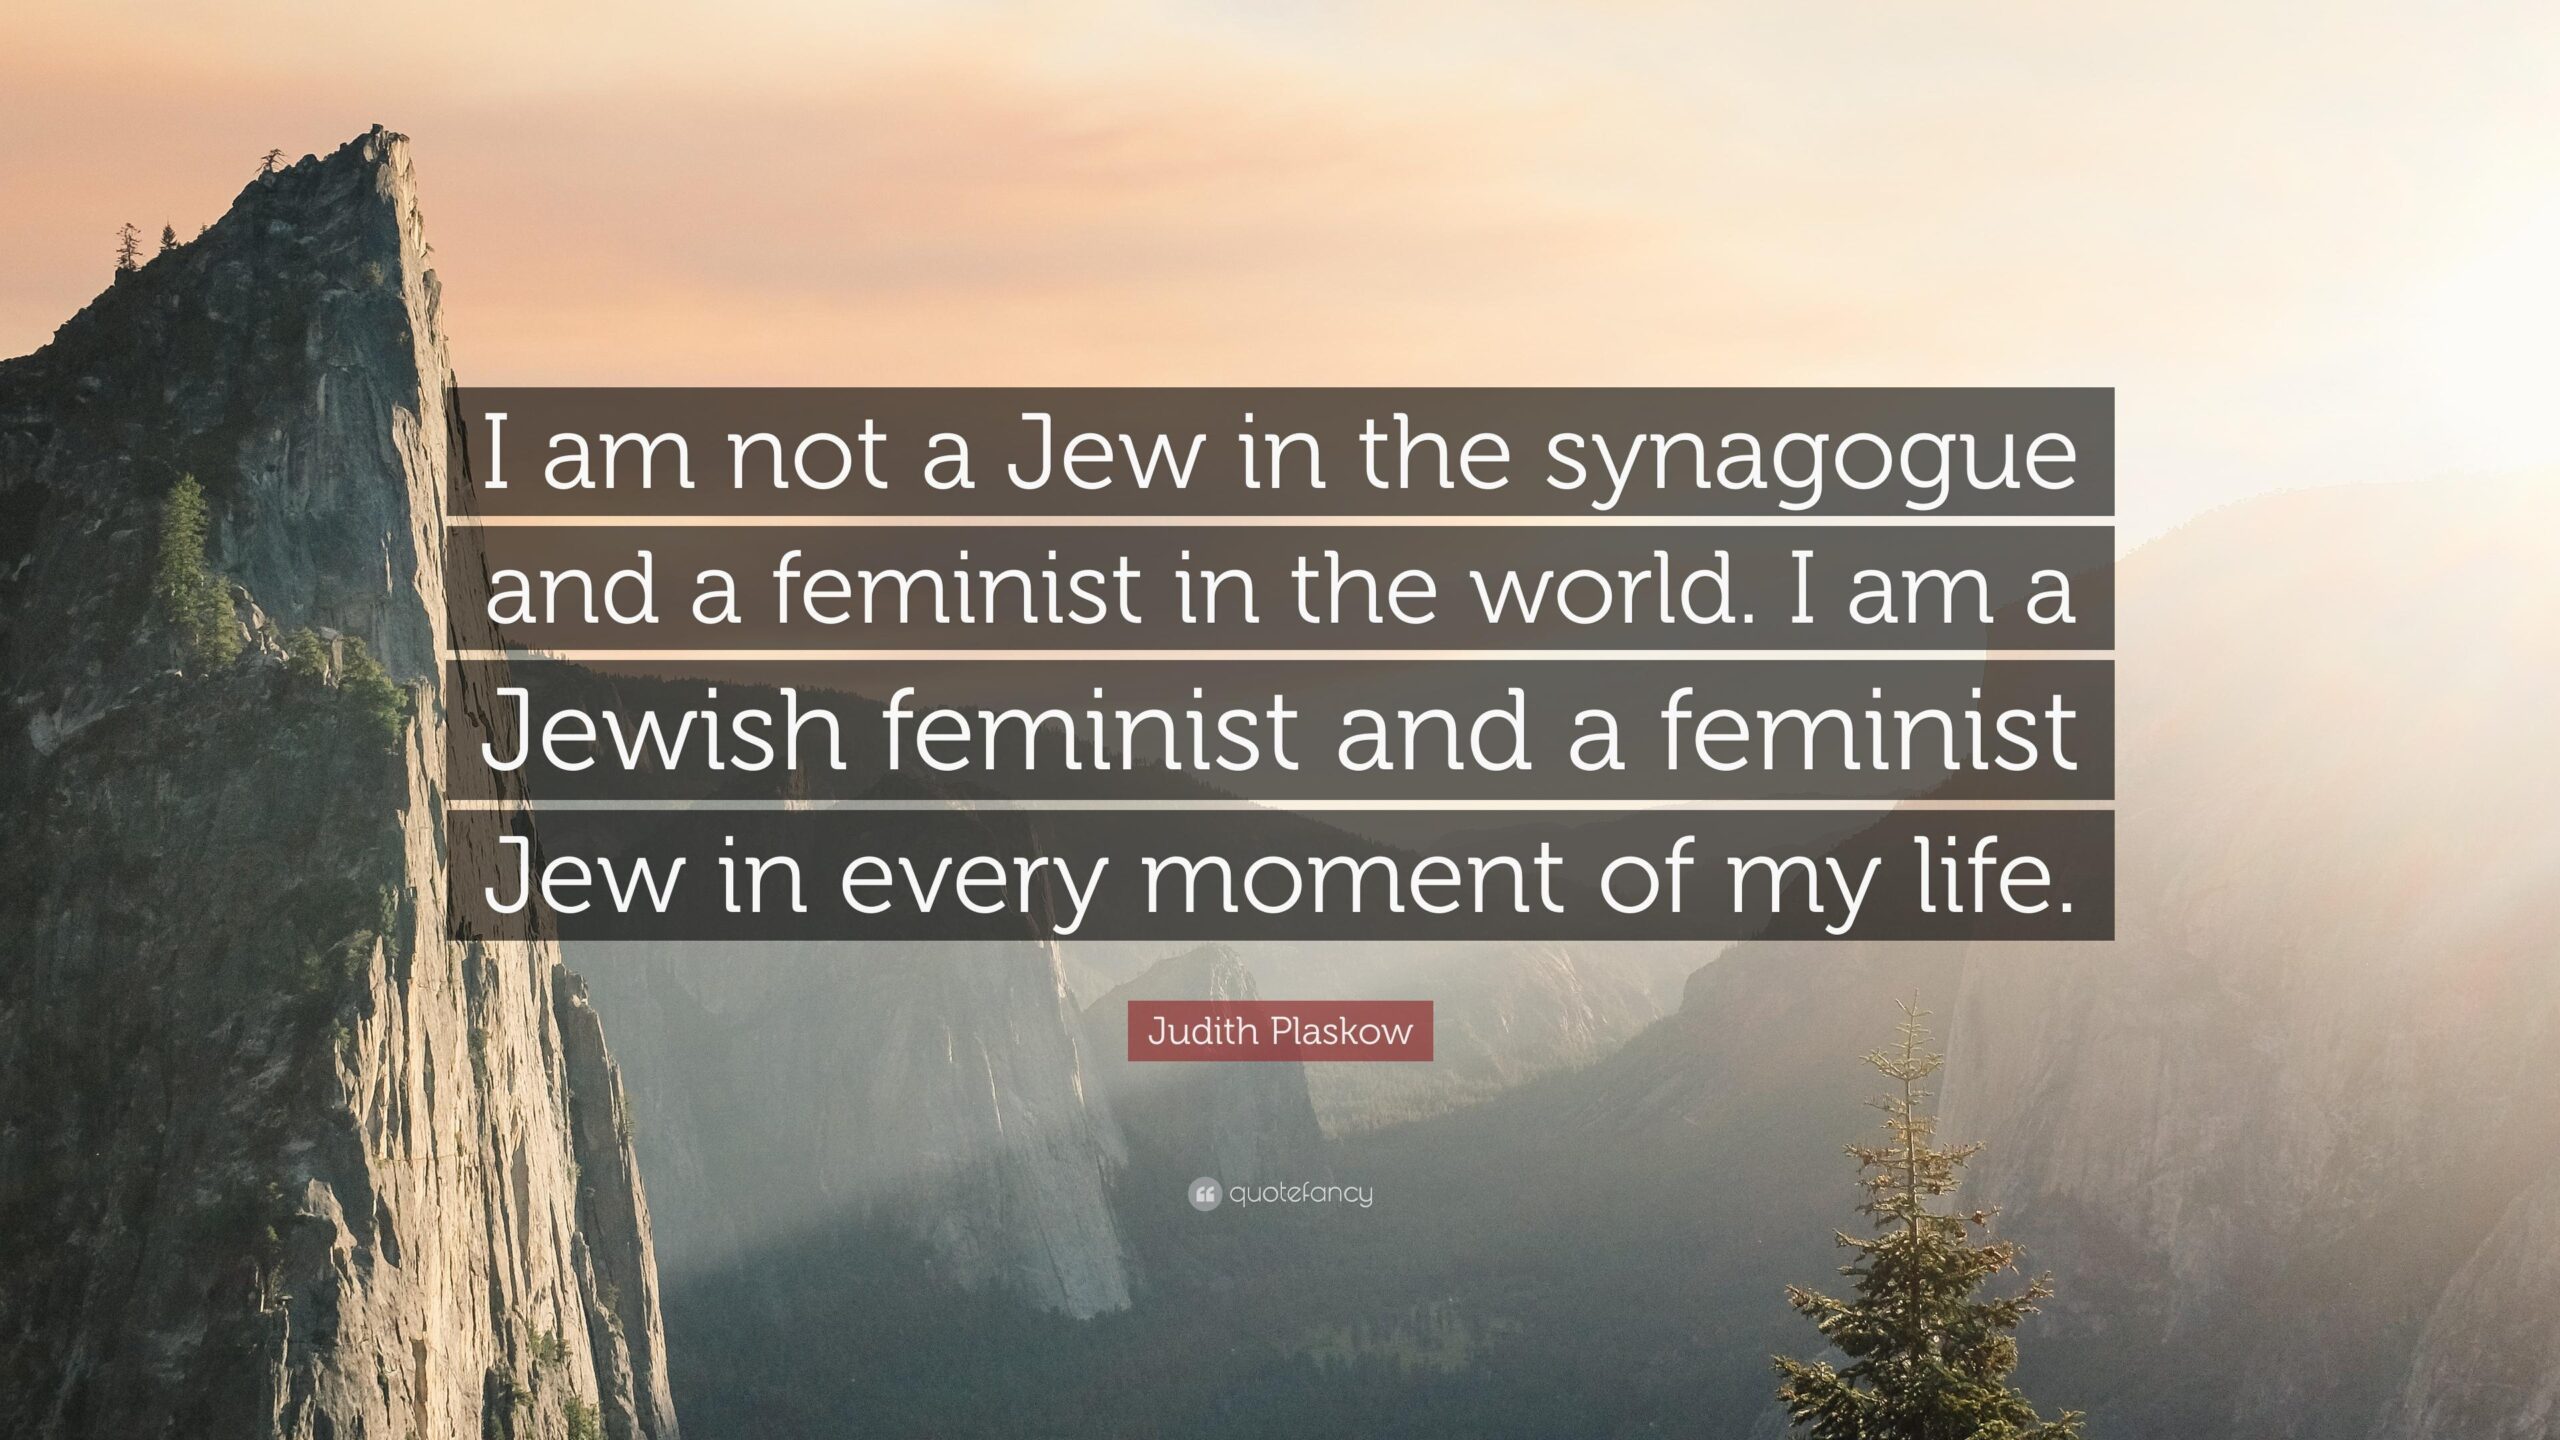 Judith Plaskow Quote “I am not a Jew in the synagogue and a